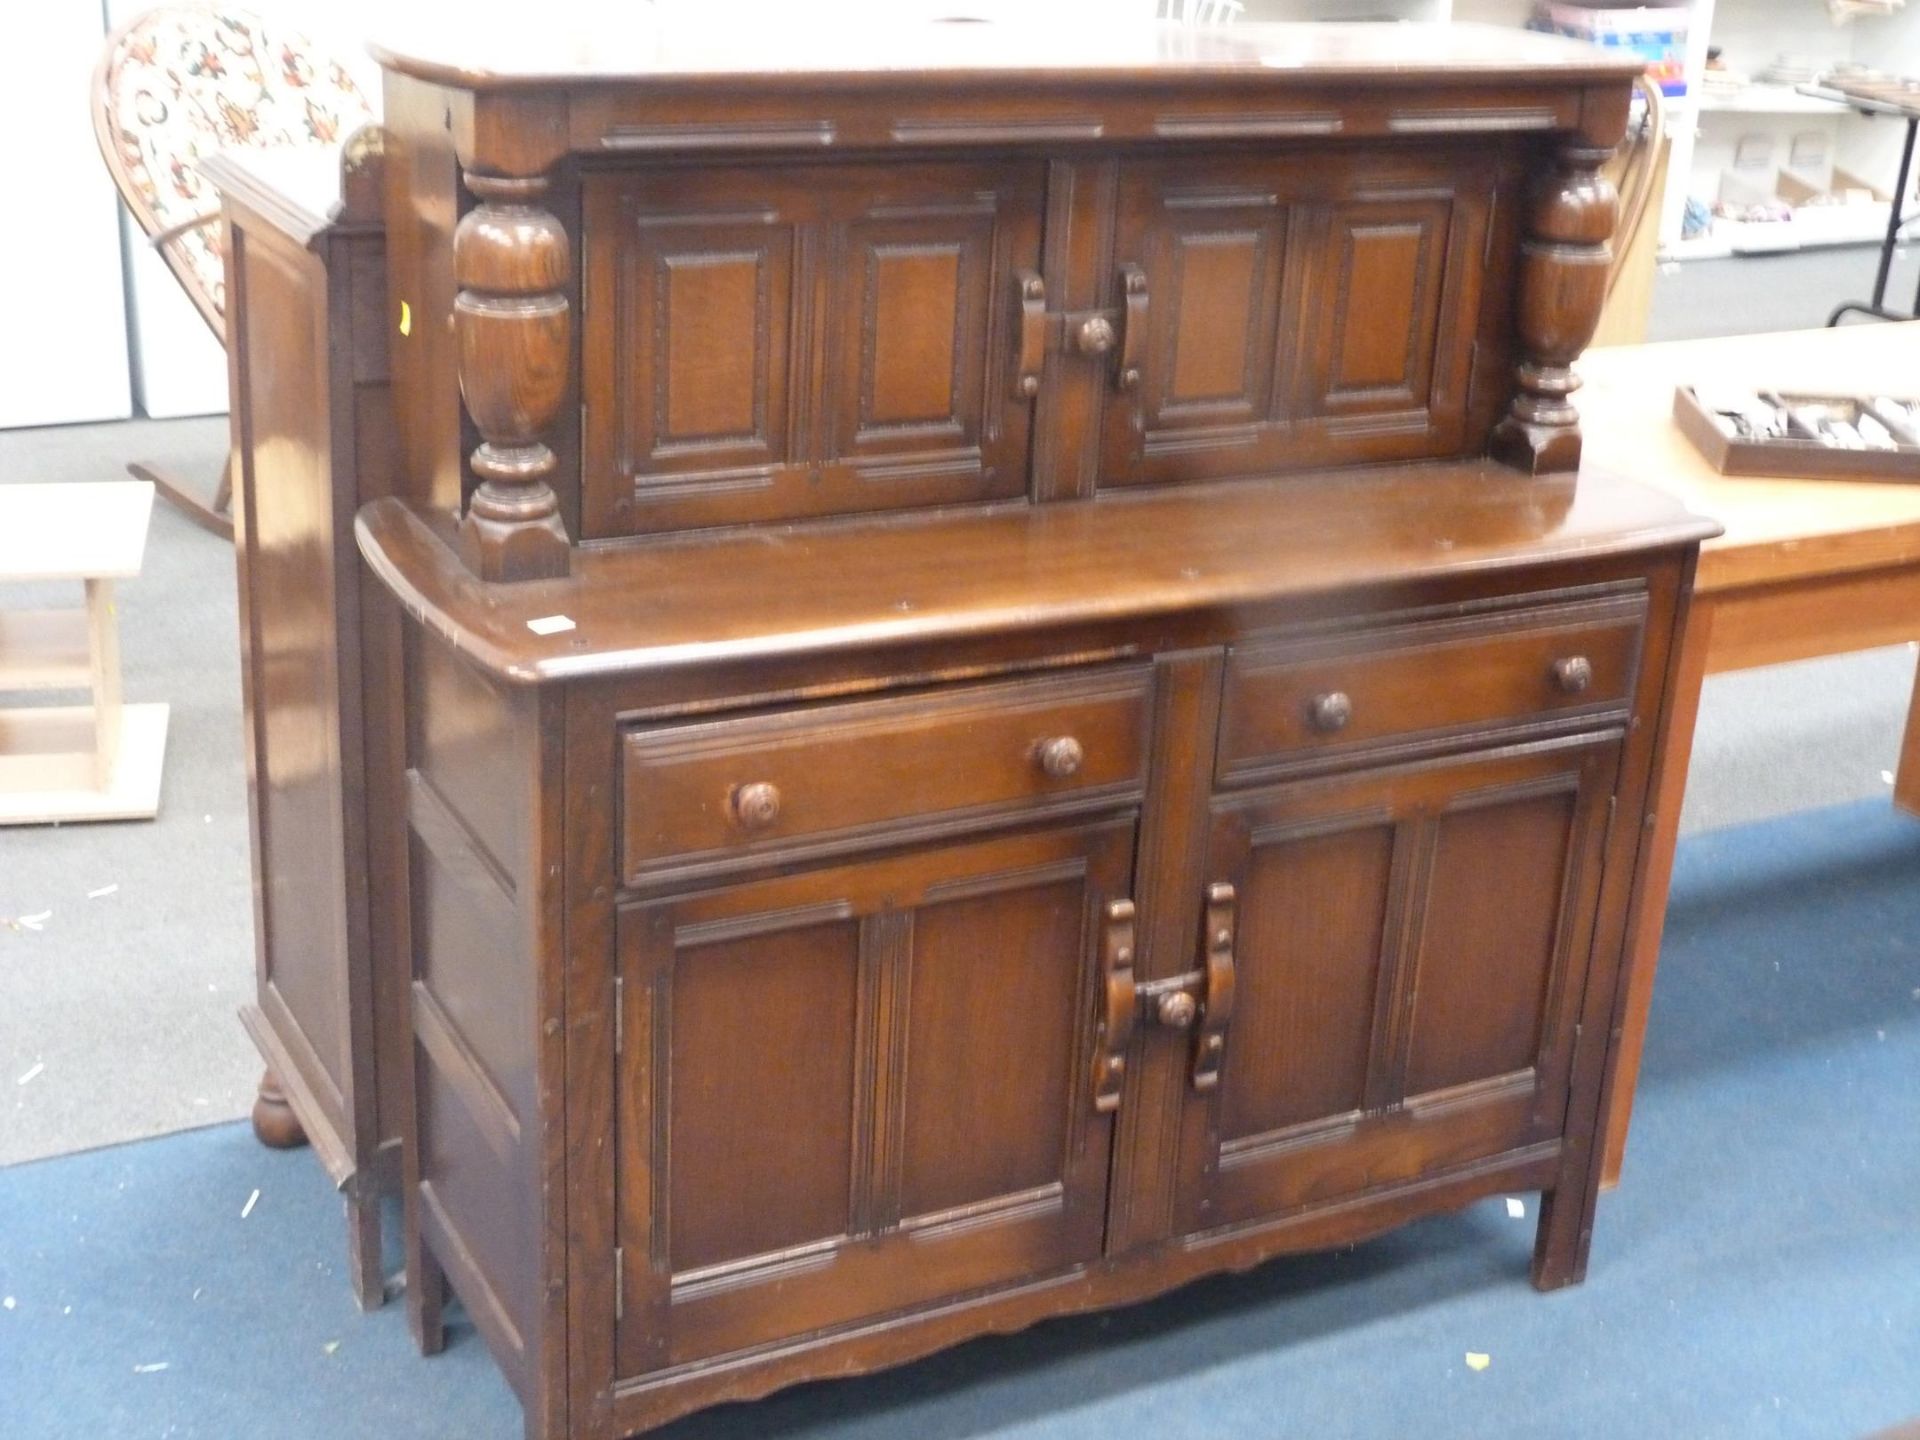 An Ercol Court Cabinet (with cutlery drawer and contents) (H 126cm, W 123cm, D 45cm) (est. £50-£80) - Image 2 of 5